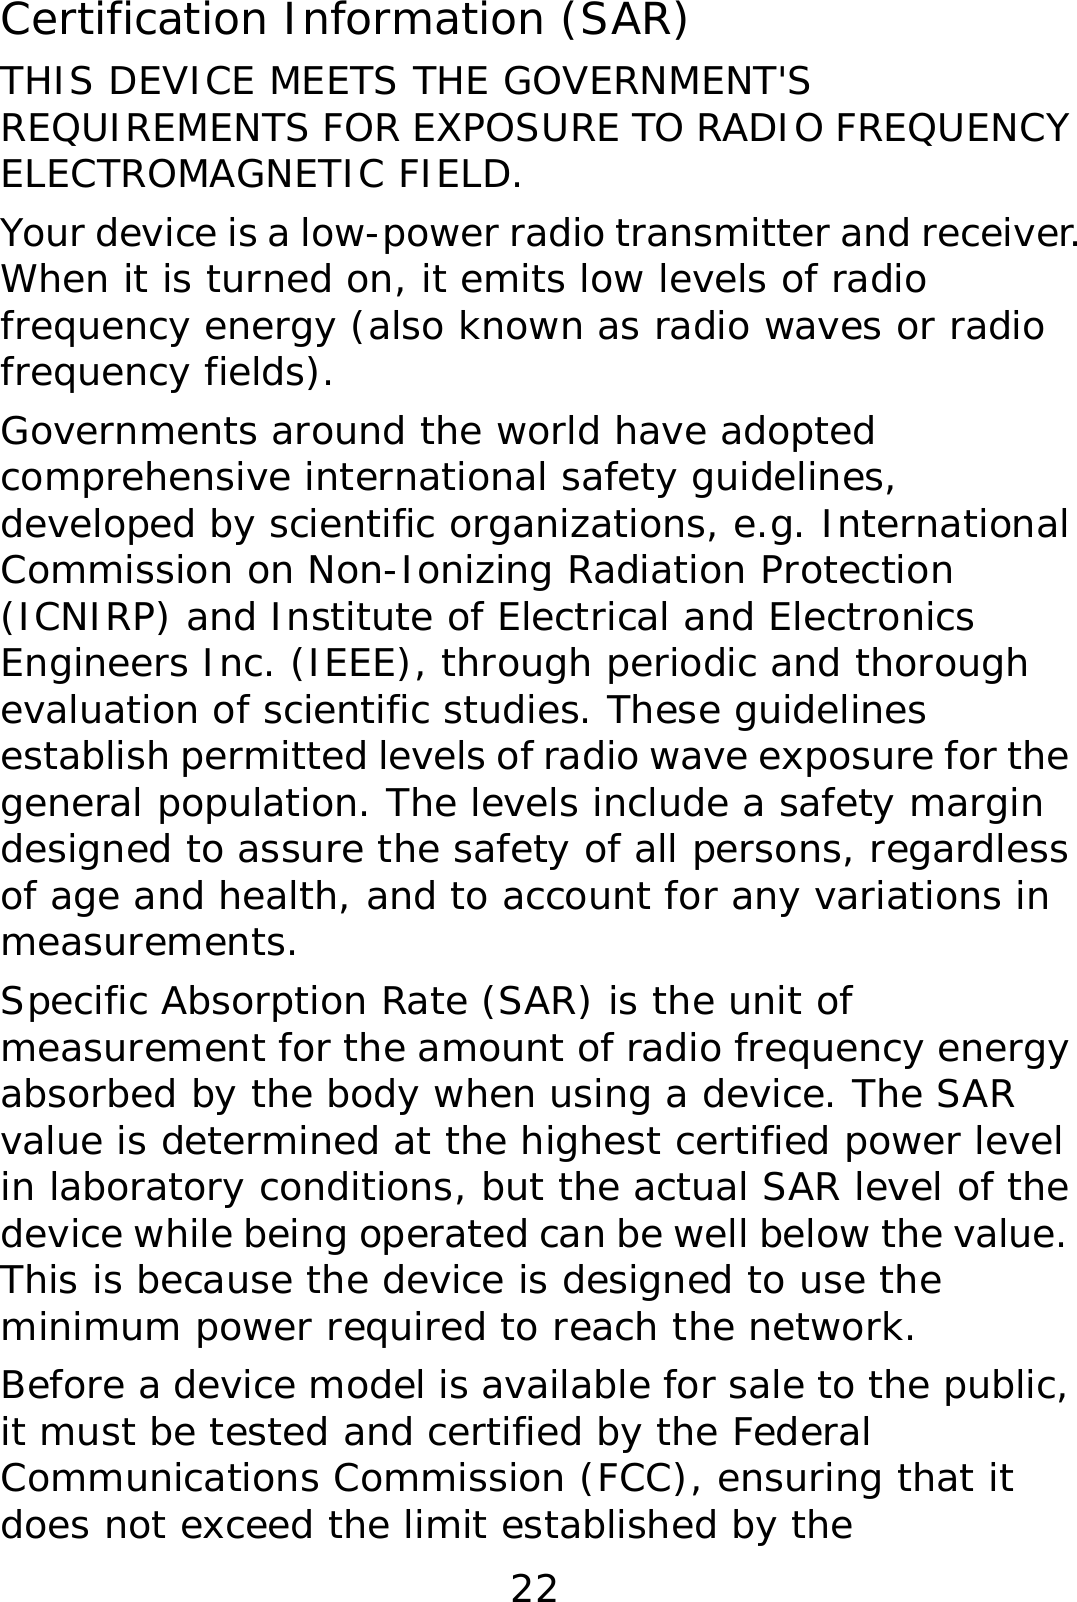 22 Certification Information (SAR) THIS DEVICE MEETS THE GOVERNMENT&apos;S REQUIREMENTS FOR EXPOSURE TO RADIO FREQUENCY ELECTROMAGNETIC FIELD. Your device is a low-power radio transmitter and receiver. When it is turned on, it emits low levels of radio frequency energy (also known as radio waves or radio frequency fields). Governments around the world have adopted comprehensive international safety guidelines, developed by scientific organizations, e.g. International Commission on Non-Ionizing Radiation Protection (ICNIRP) and Institute of Electrical and Electronics Engineers Inc. (IEEE), through periodic and thorough evaluation of scientific studies. These guidelines establish permitted levels of radio wave exposure for the general population. The levels include a safety margin designed to assure the safety of all persons, regardless of age and health, and to account for any variations in measurements. Specific Absorption Rate (SAR) is the unit of measurement for the amount of radio frequency energy absorbed by the body when using a device. The SAR value is determined at the highest certified power level in laboratory conditions, but the actual SAR level of the device while being operated can be well below the value. This is because the device is designed to use the minimum power required to reach the network. Before a device model is available for sale to the public, it must be tested and certified by the Federal Communications Commission (FCC), ensuring that it does not exceed the limit established by the 